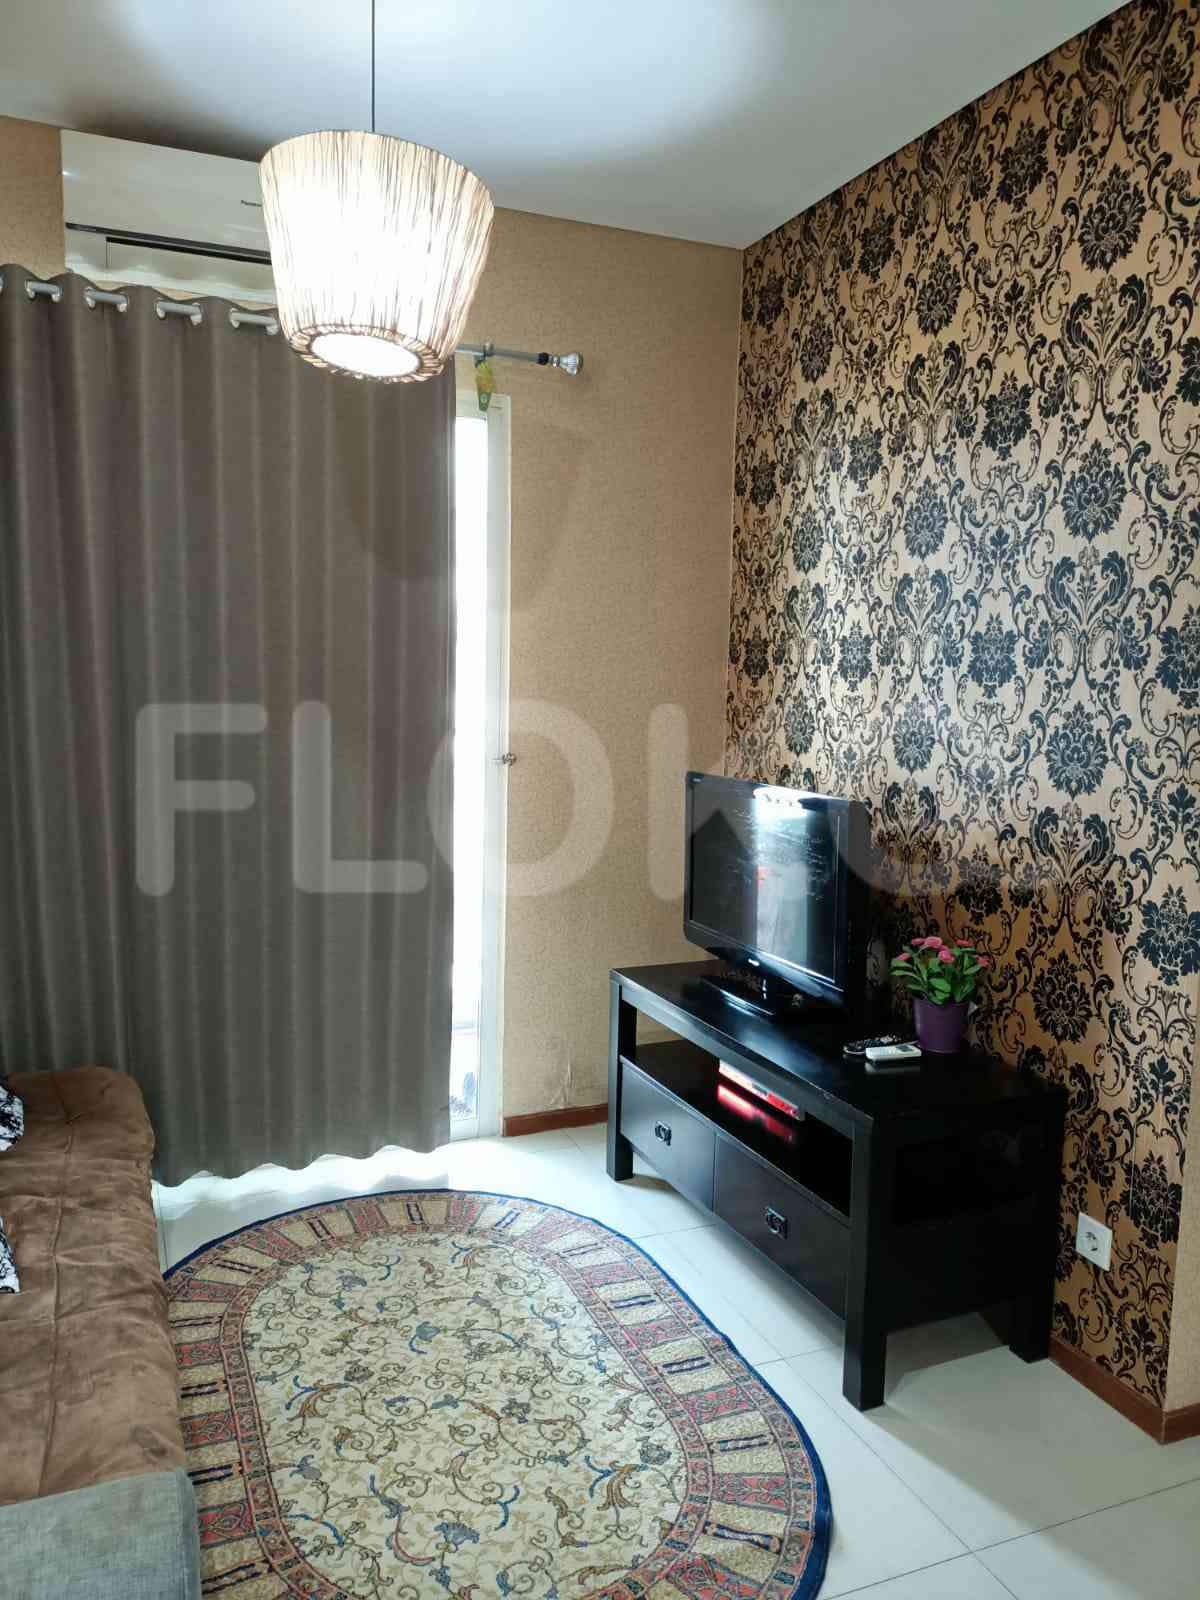 2 Bedroom on 31st Floor for Rent in Thamrin Residence Apartment - fthd39 2